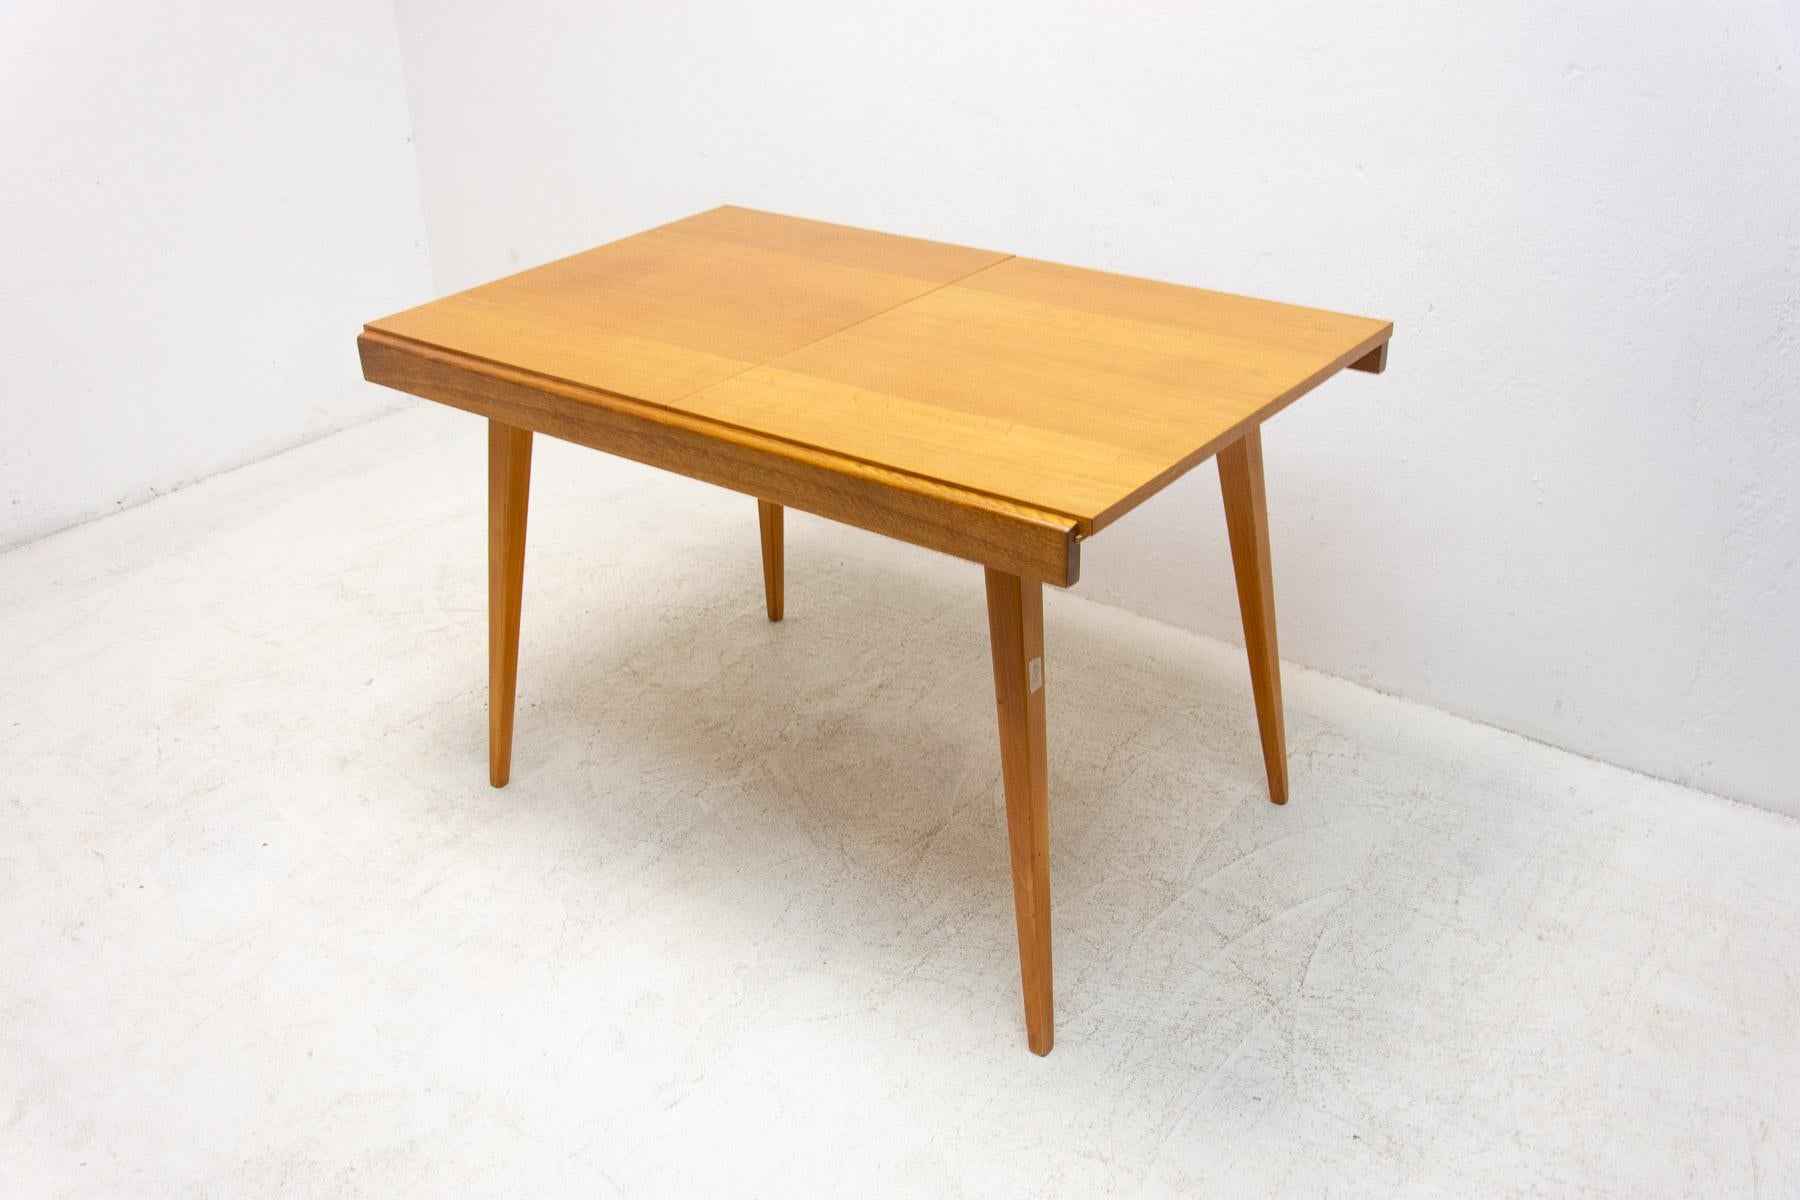 This adjustable dining table was designed by František Jirák for Tatra nábytok in the 1970´s and made in the former Czechoslovakia in the 1970´s. It´s made of ash and beechwood. The lenght is adjustable from 120 cm to 170 cm. The table is in very